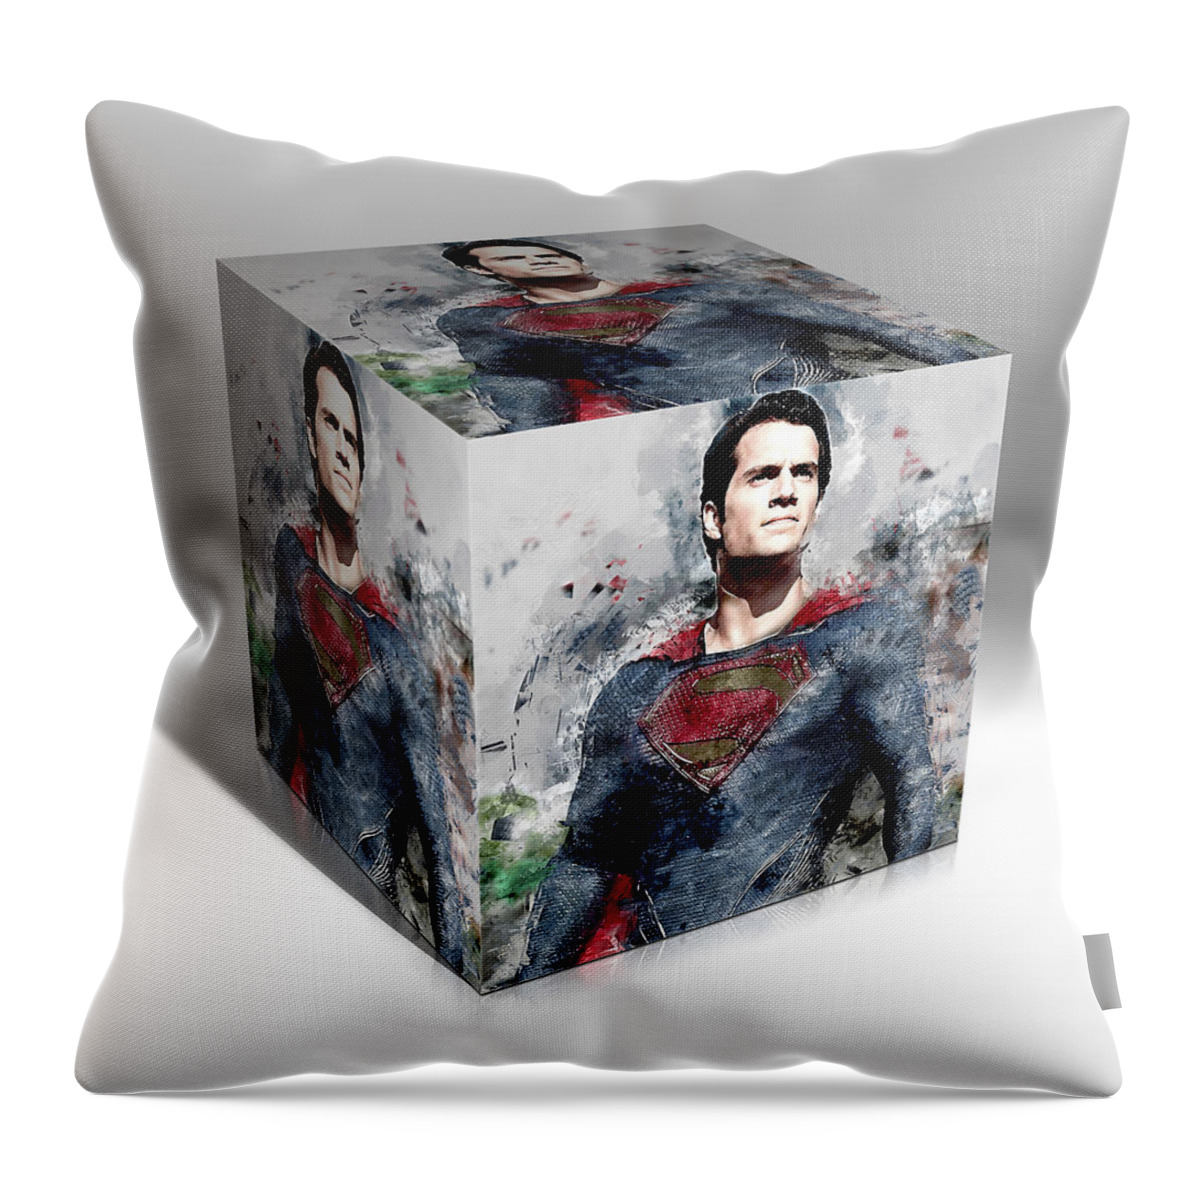 Cool Throw Pillow featuring the mixed media Superman Superhero by Marvin Blaine